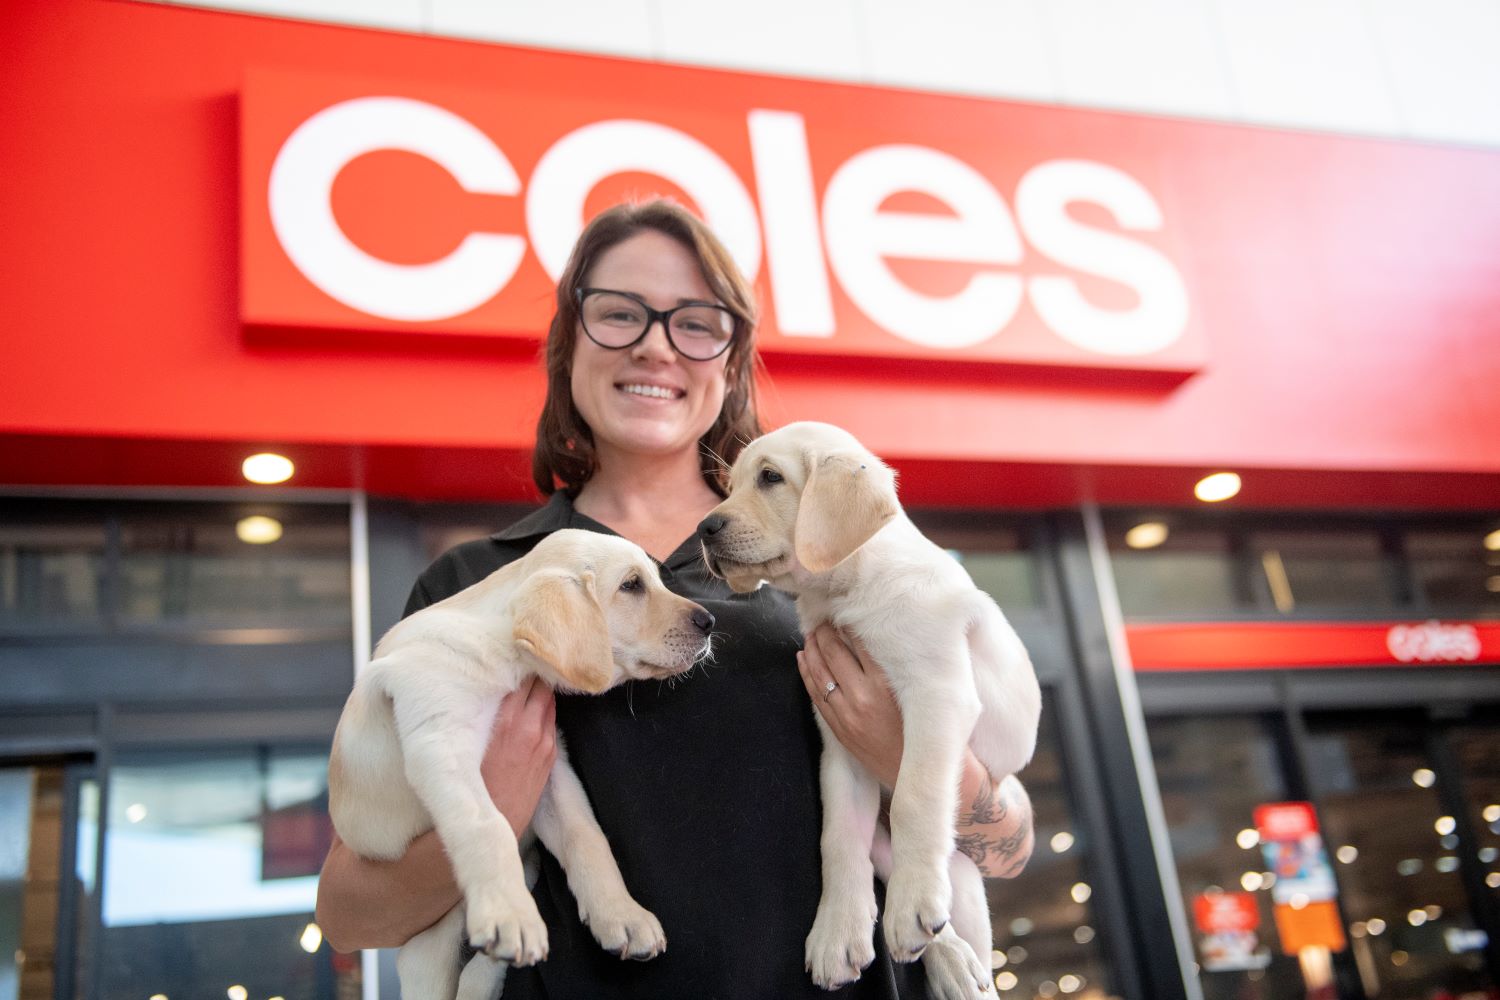 Guide Dogs trainer Chelsea with puppies in training Fergie and Idle